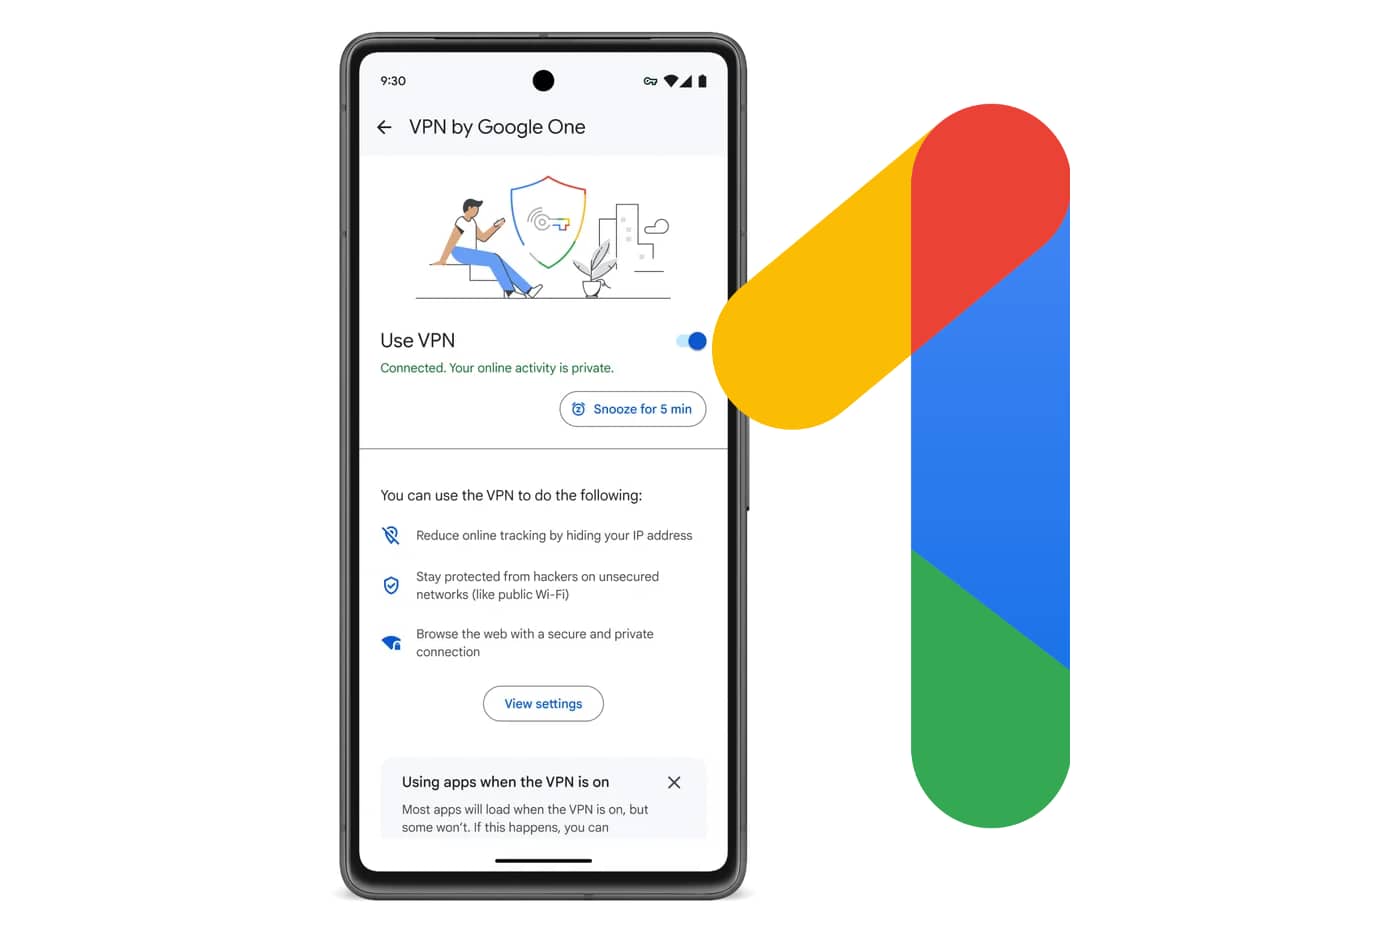 Le VPN, from Google One, is now available for all plans.